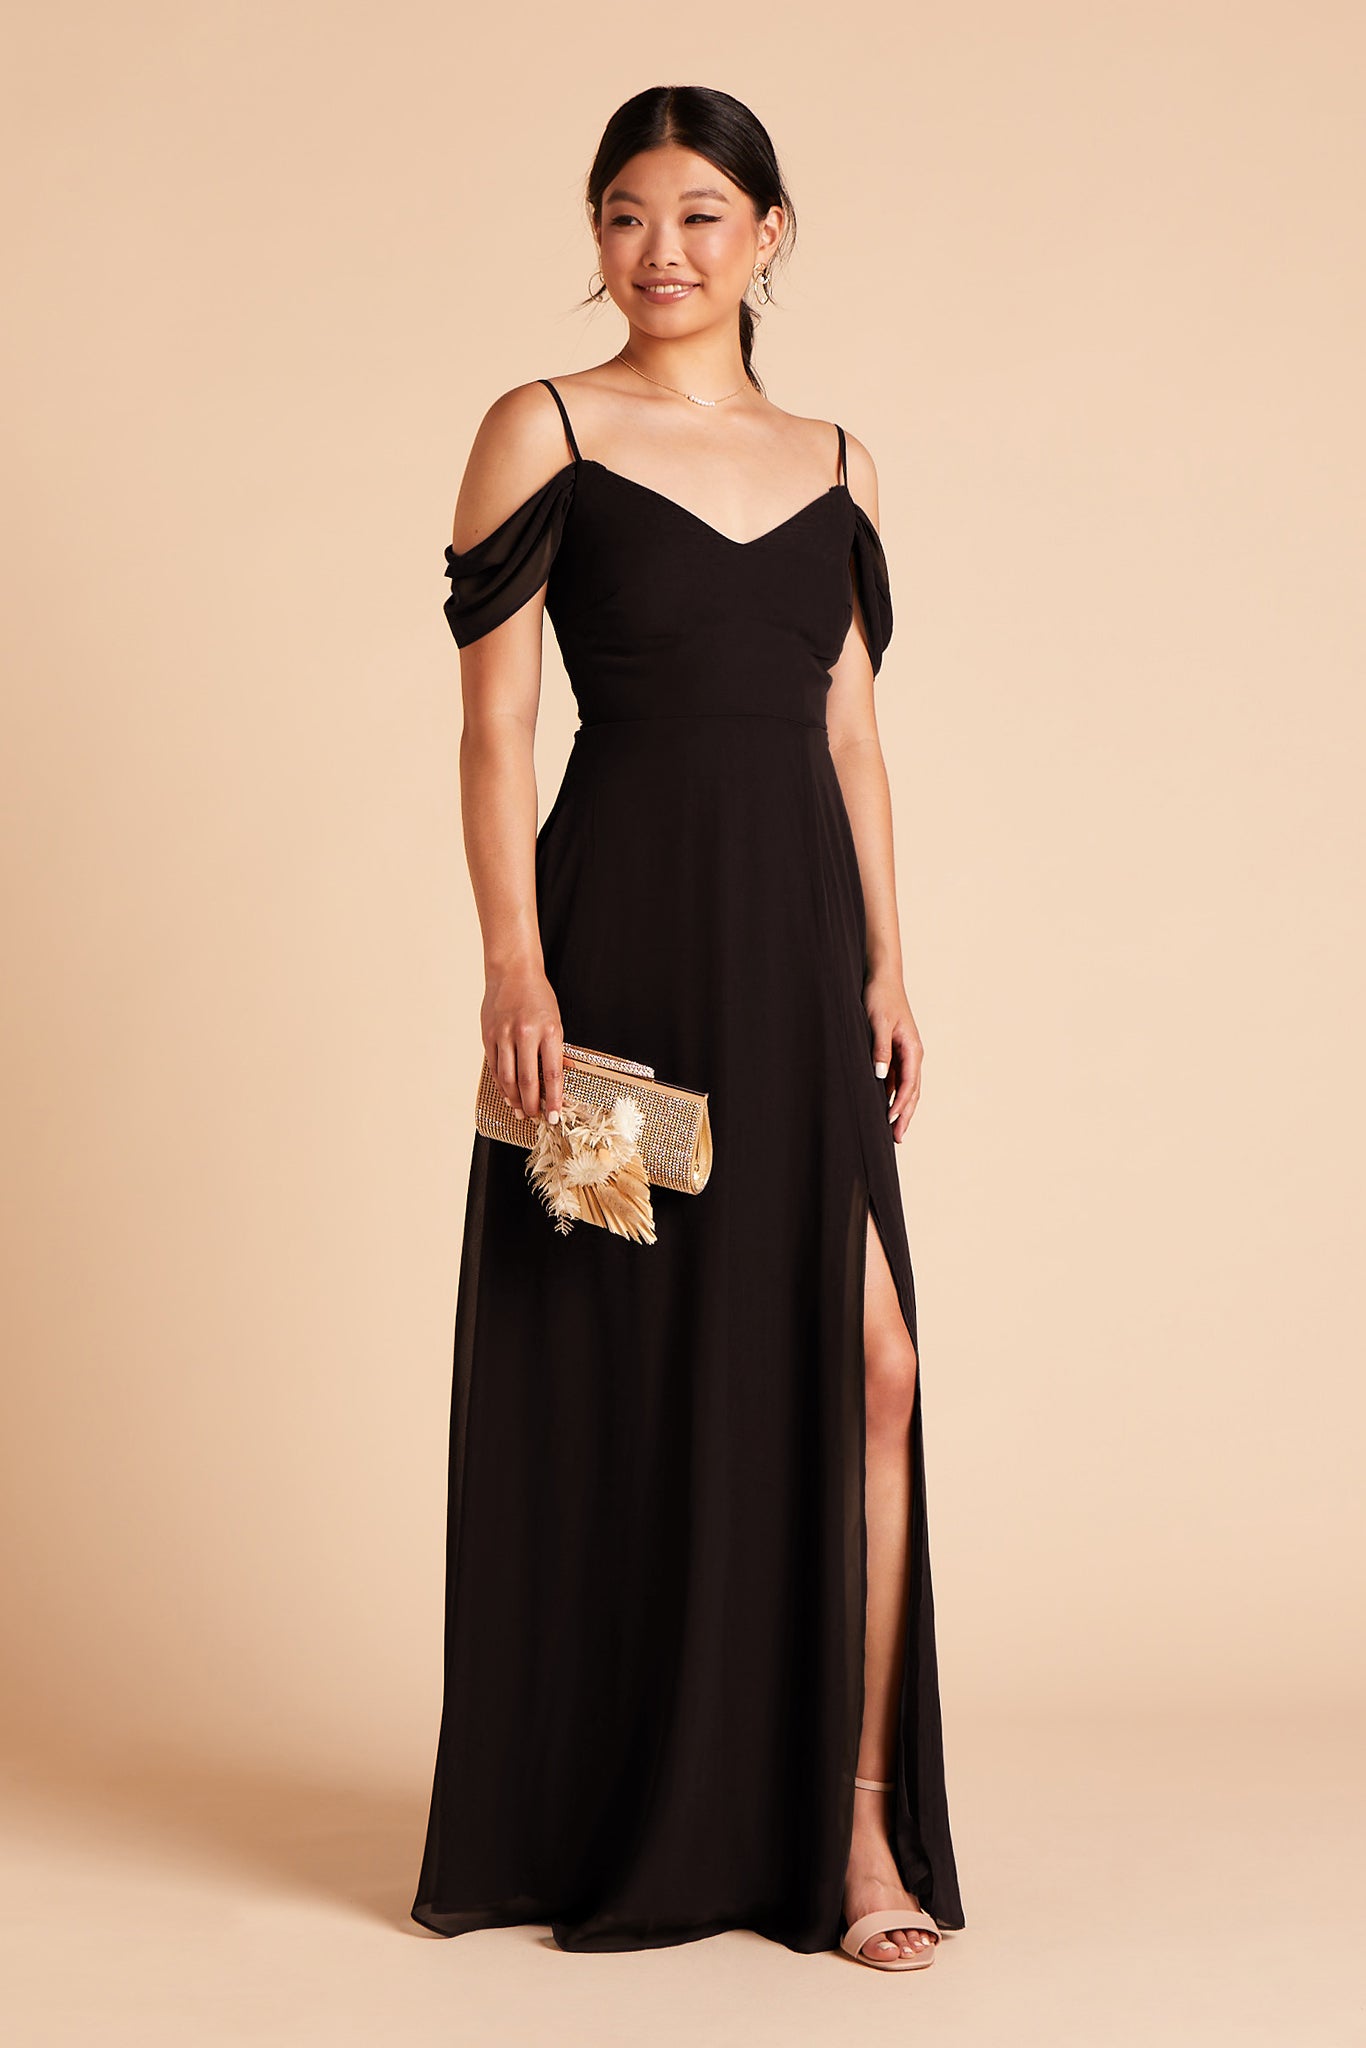 Long floor-sweeping black chiffon bridesmaid dress with slit and a V-neckline and sleeves